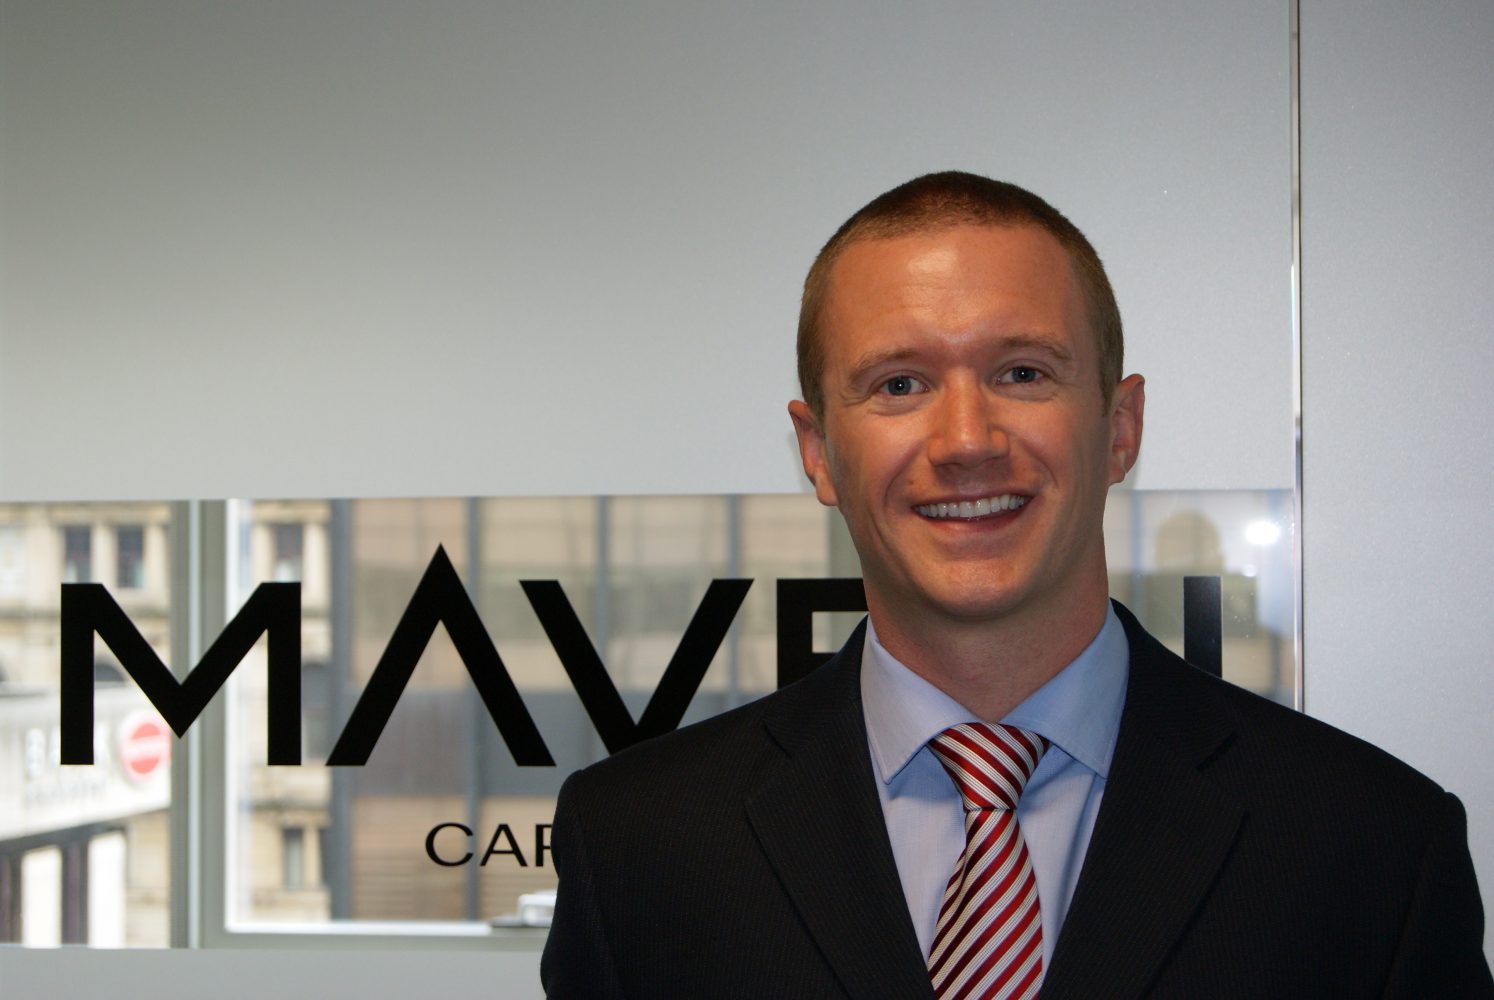 A headshot of Ryan Bevington, the Investment Director at Maven